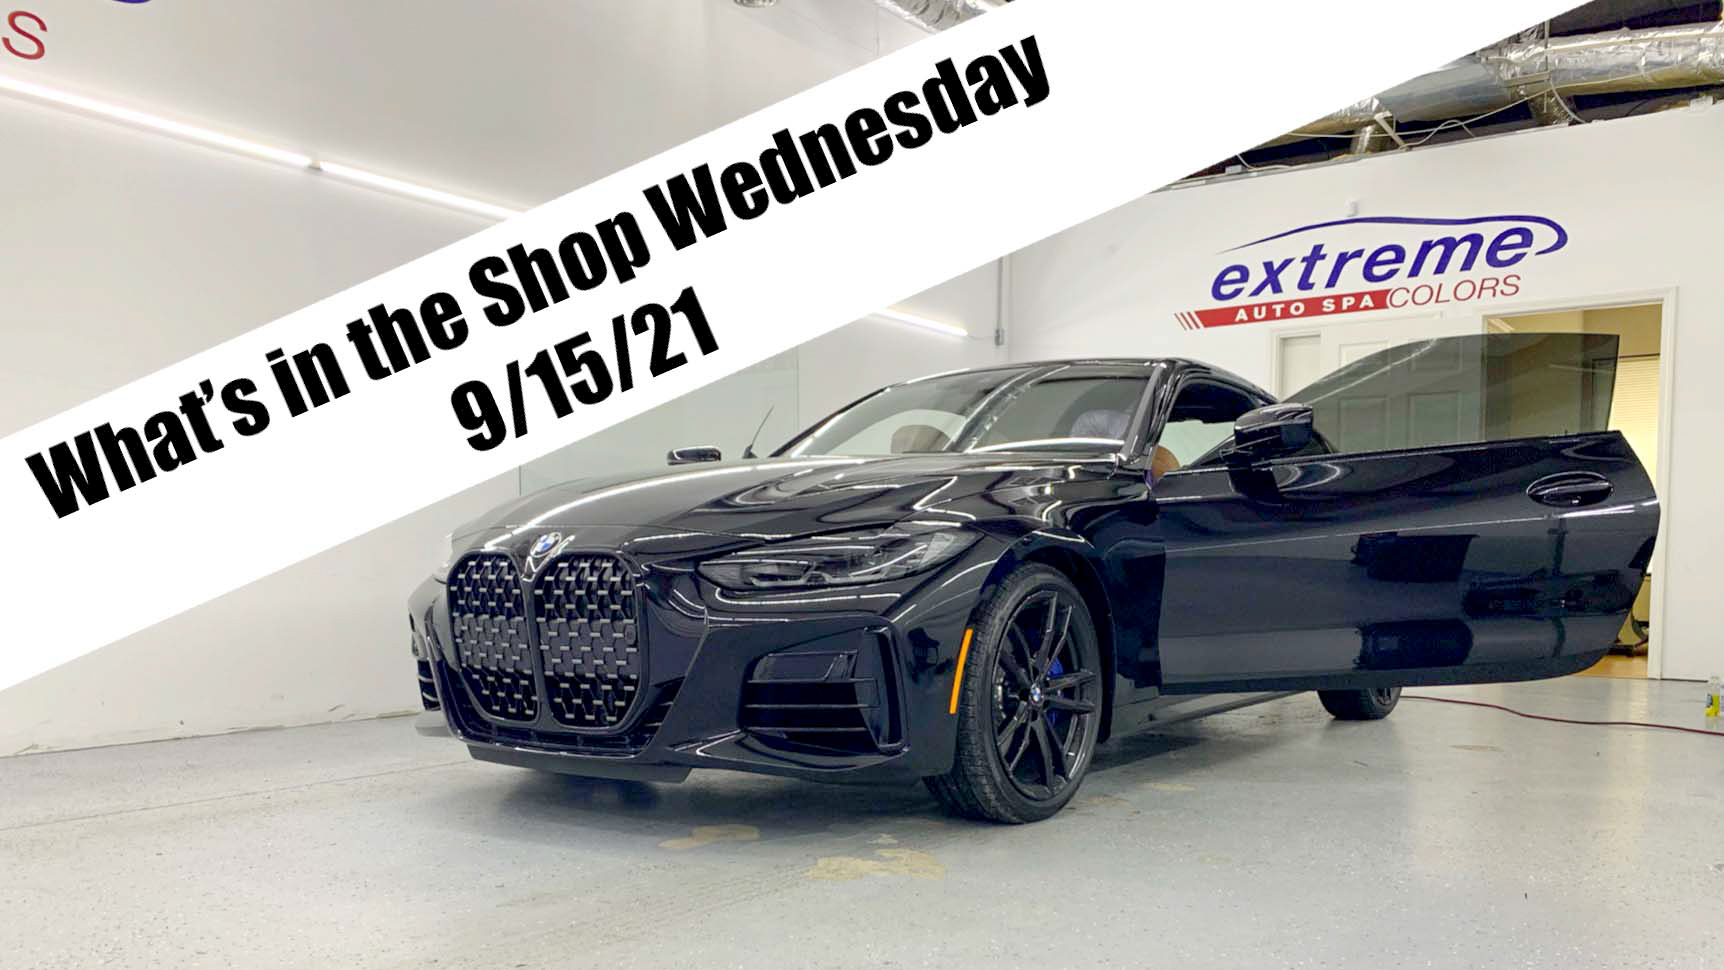 What’s in the Shop Wednesday 9/15/21